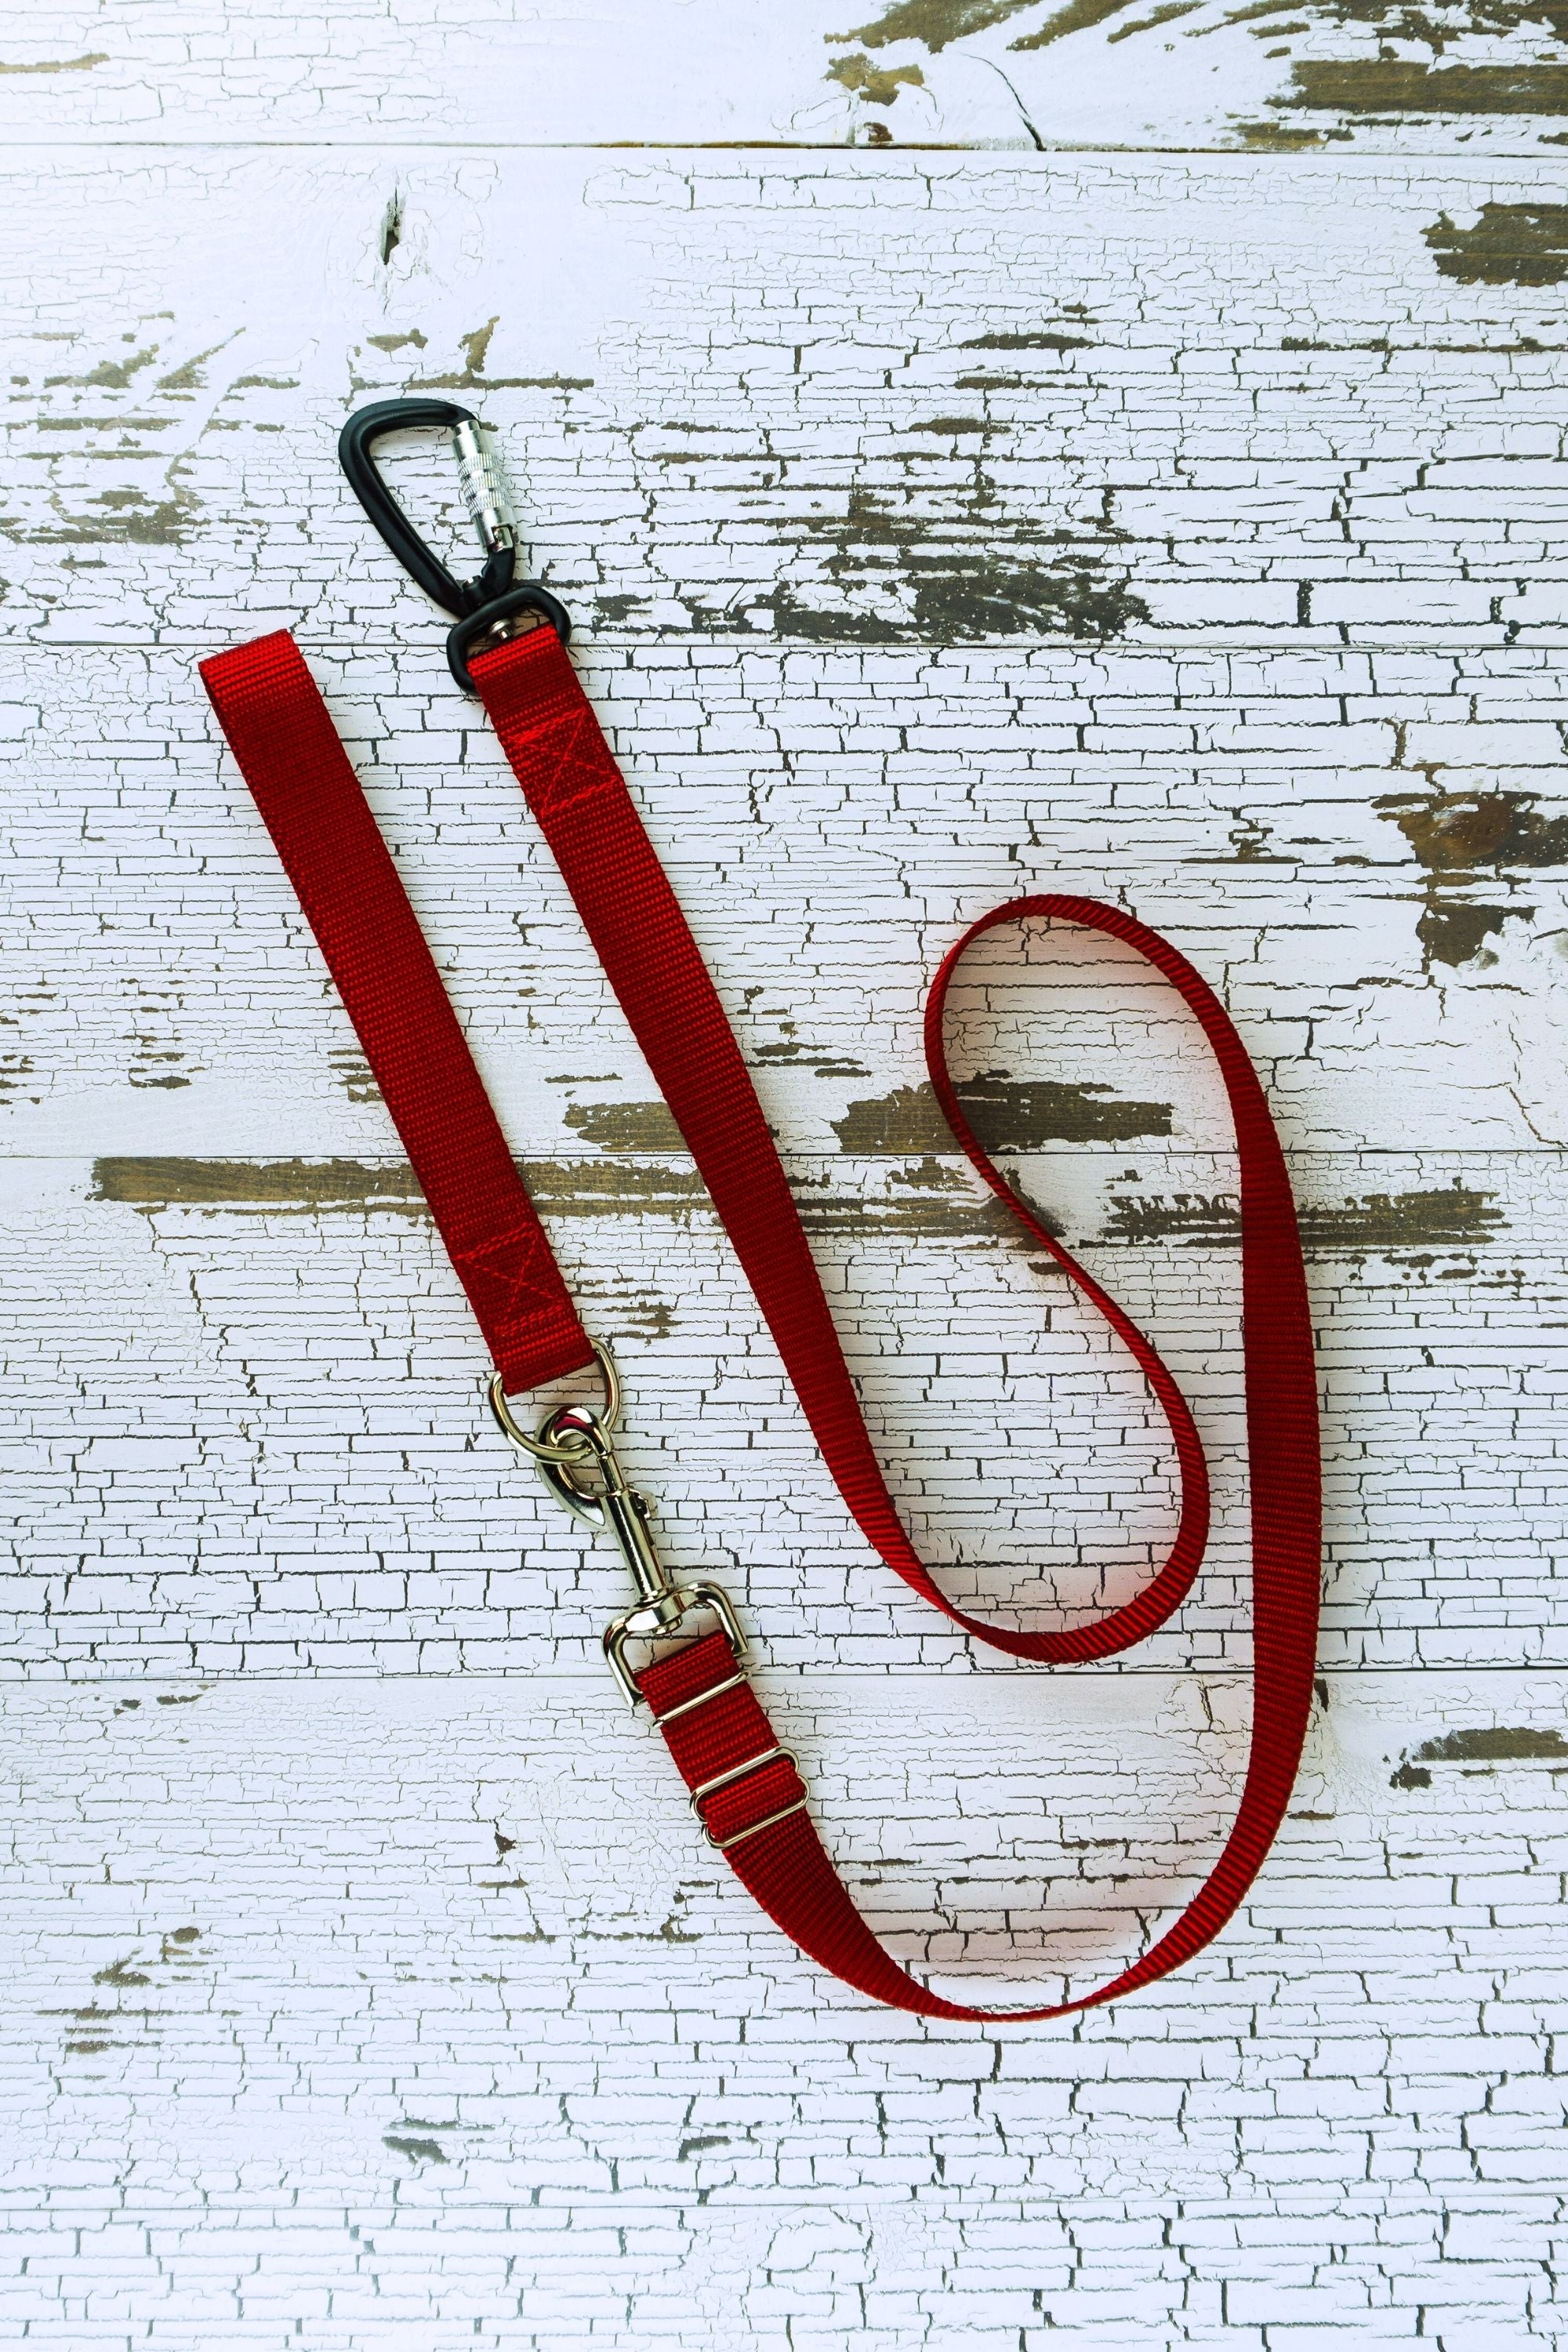 Convert a hands free leash to a handheld leash by adding a leash handle with a d ring.